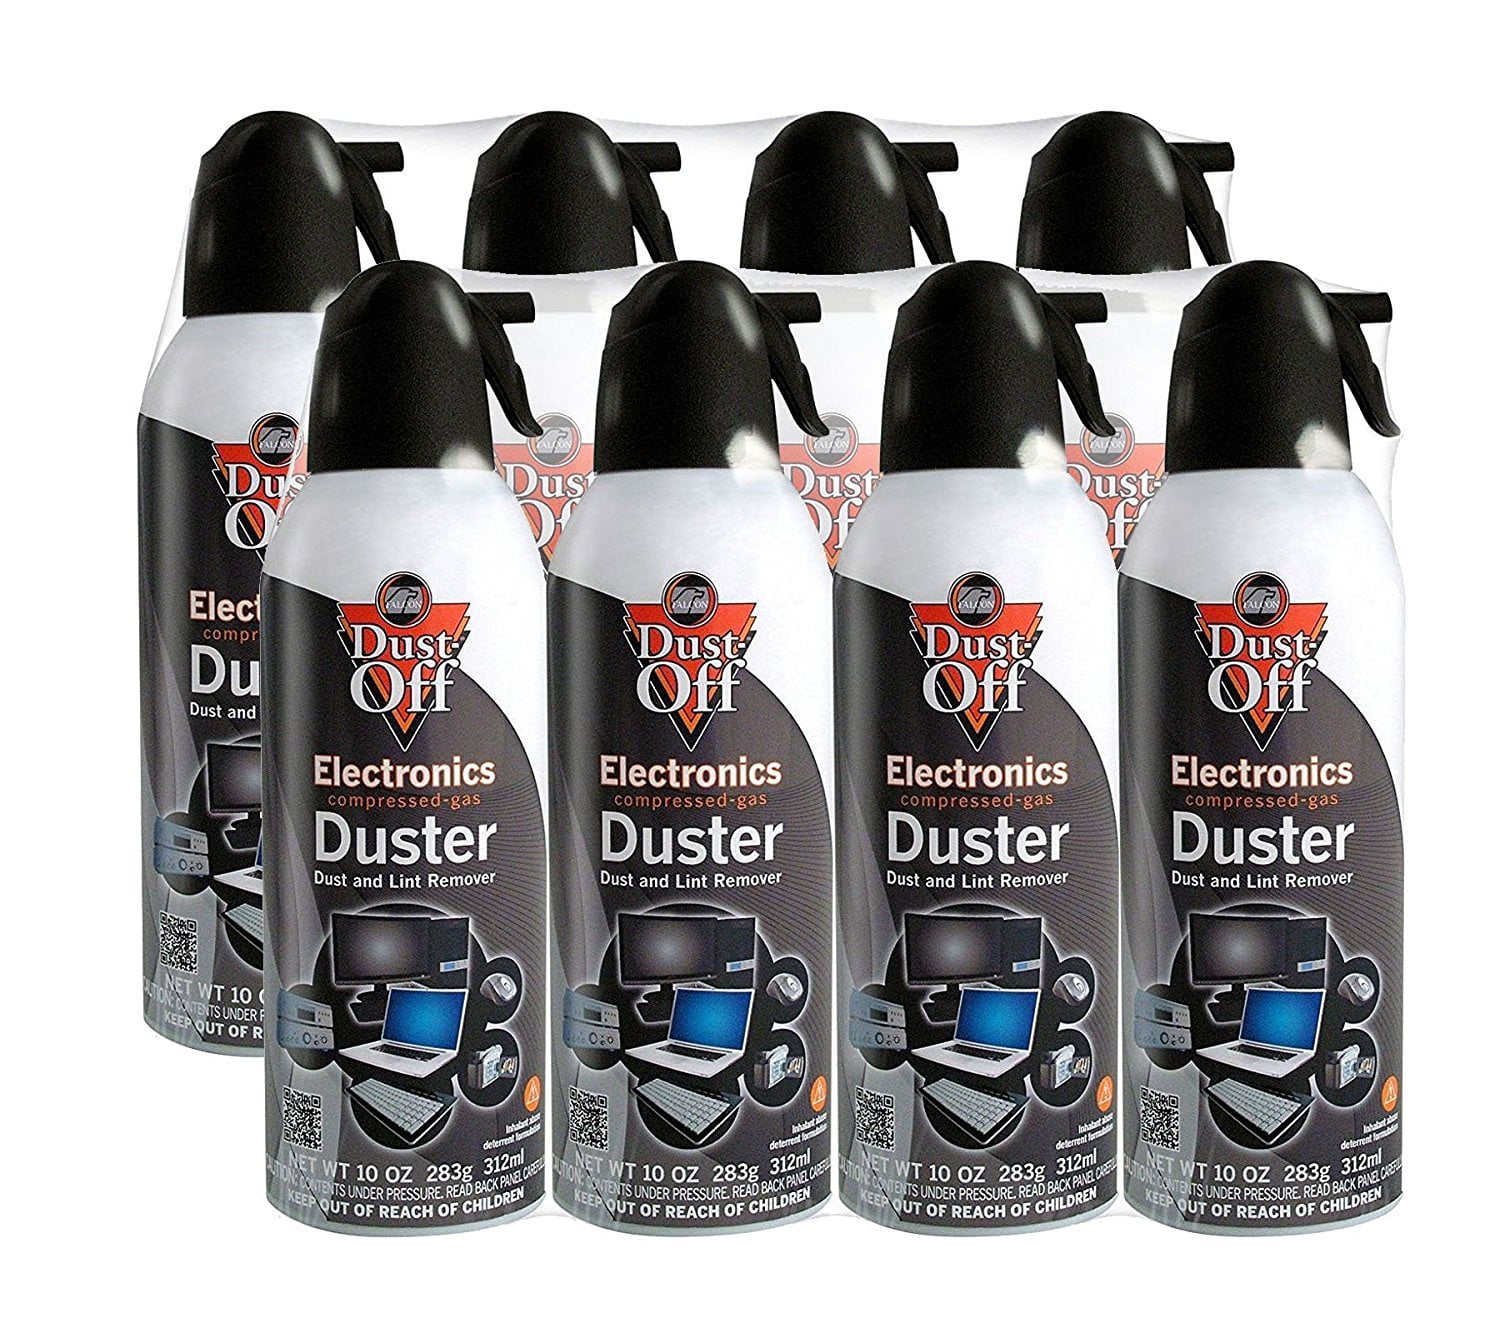 Dust Off The Original Compressed Gas Duster, 7 oz